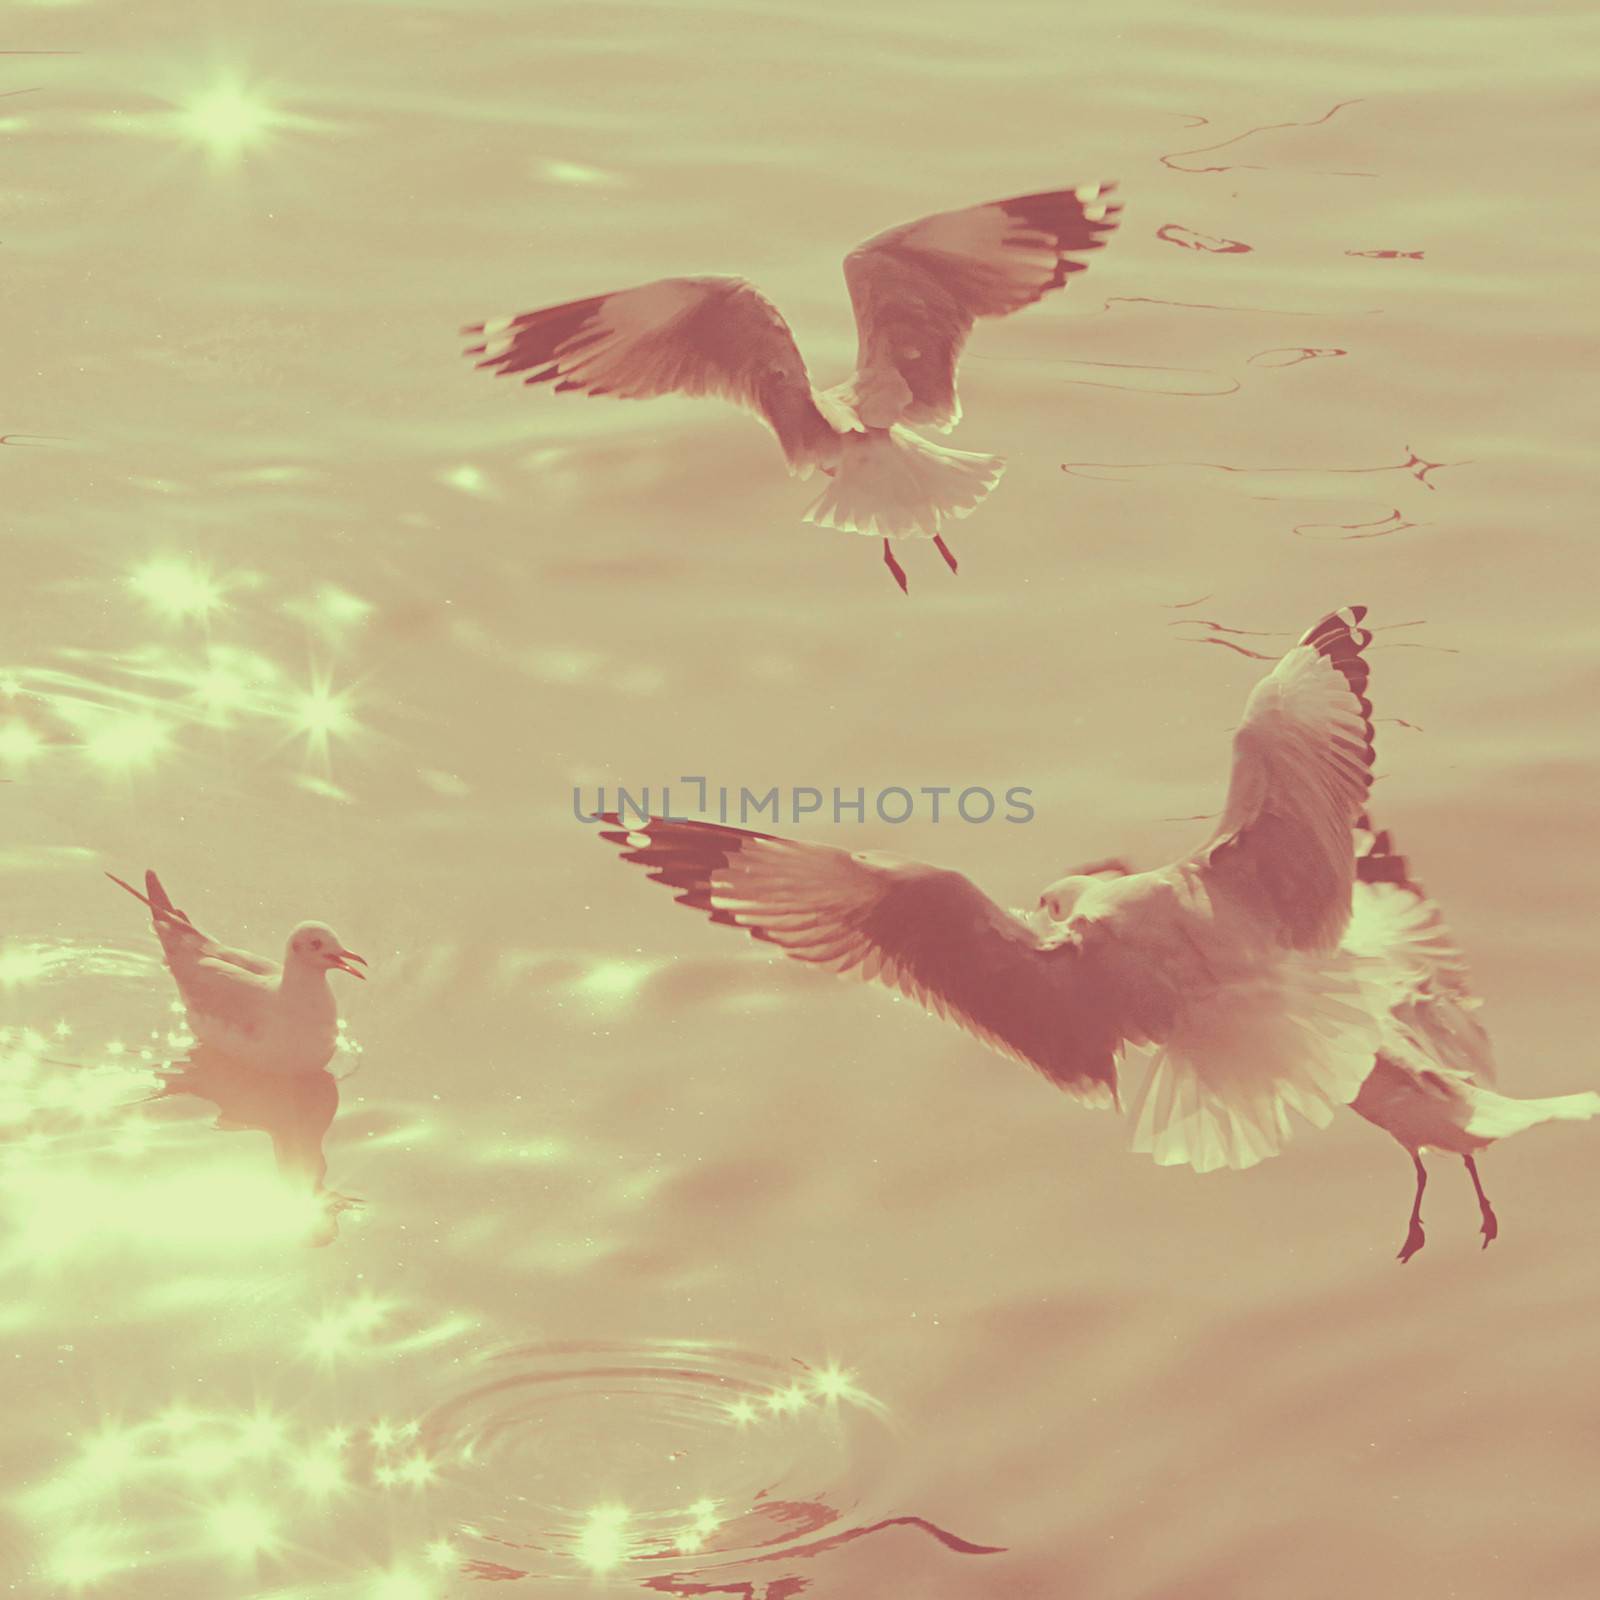 Seagulls over the sea with retro filter effect by nuchylee